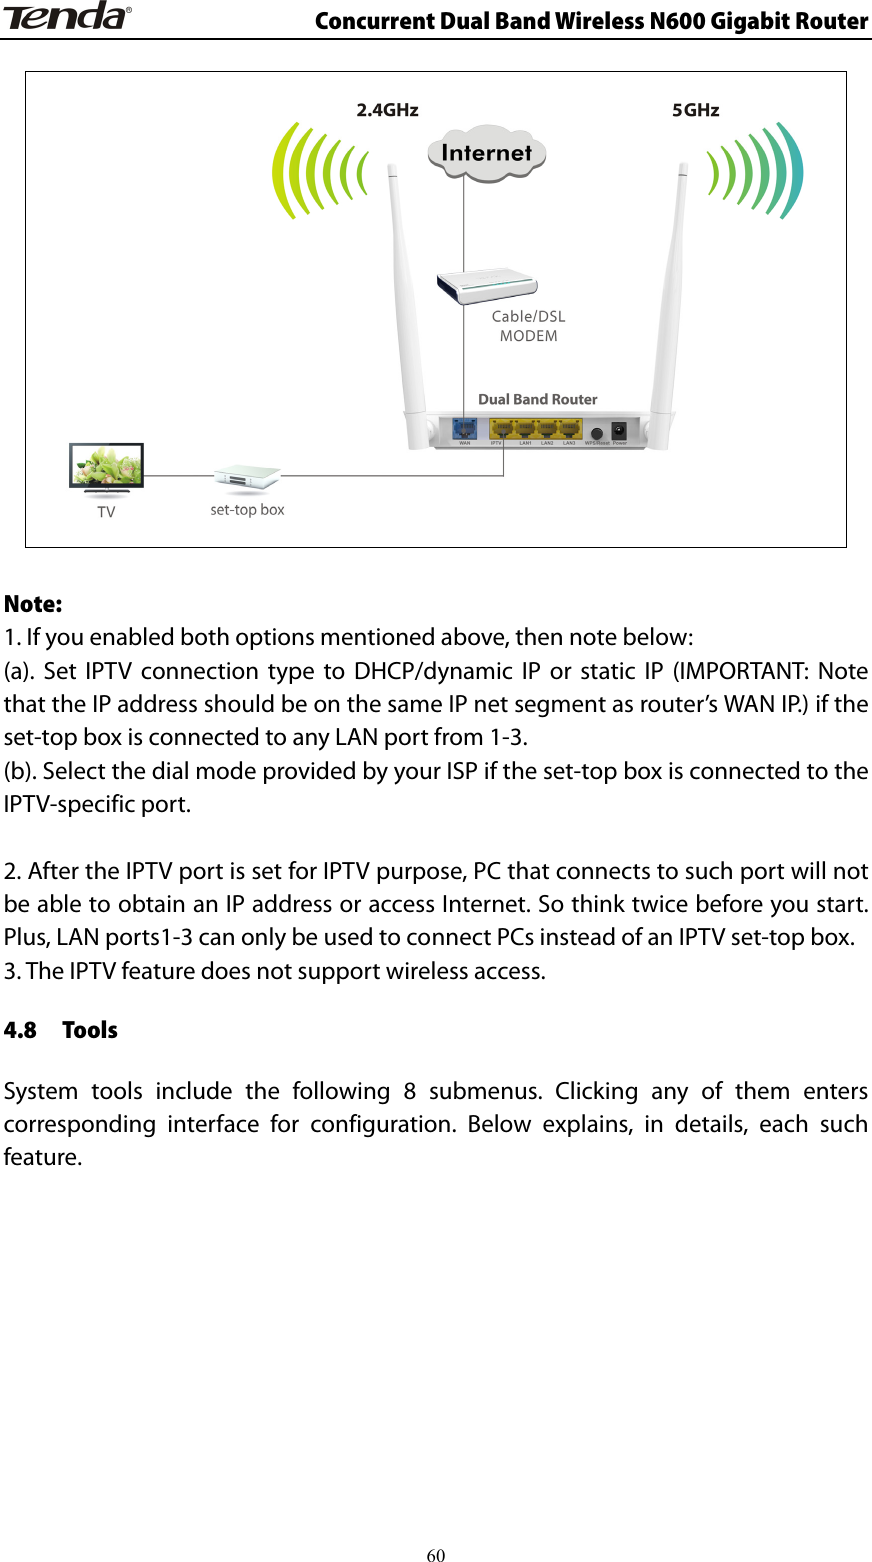                      Concurrent Dual Band Wireless N600 Gigabit Router   Note: 1. If you enabled both options mentioned above, then note below:   (a). Set IPTV connection type to DHCP/dynamic IP or static IP (IMPORTANT: Note that the IP address should be on the same IP net segment as router’s WAN IP.) if the set-top box is connected to any LAN port from 1-3. (b). Select the dial mode provided by your ISP if the set-top box is connected to the IPTV-specific port.    2. After the IPTV port is set for IPTV purpose, PC that connects to such port will not be able to obtain an IP address or access Internet. So think twice before you start. Plus, LAN ports1-3 can only be used to connect PCs instead of an IPTV set-top box. 3. The IPTV feature does not support wireless access.   4.8  Tools System tools include the following 8 submenus. Clicking any of them enters corresponding interface for configuration. Below explains, in details, each such feature.           60